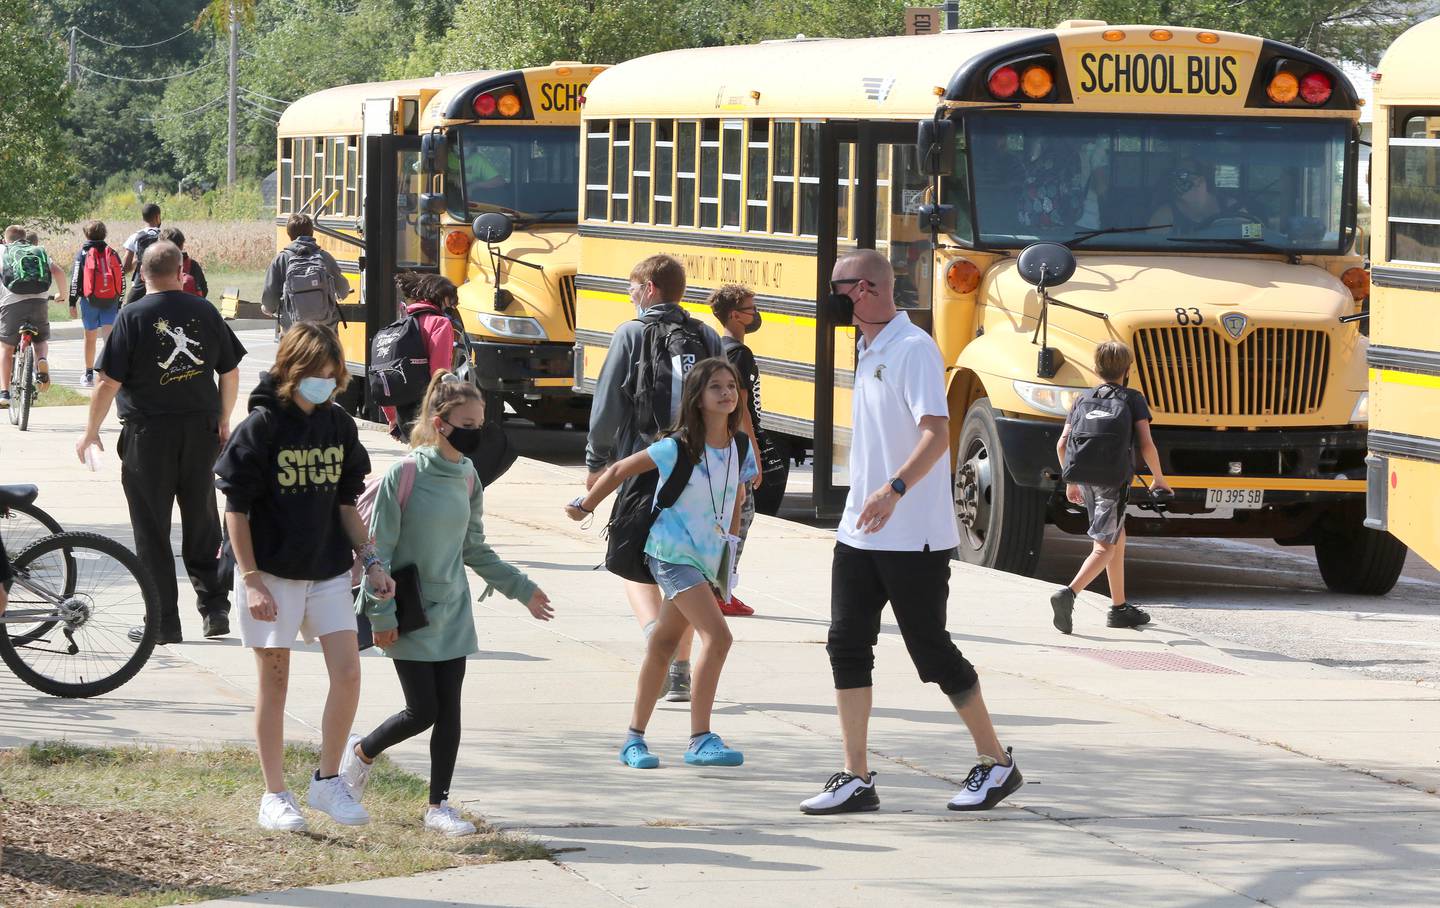 Students at Sycamore Middle School head for their buses Friday, Sep. 17, 2021 at the end of the school day.